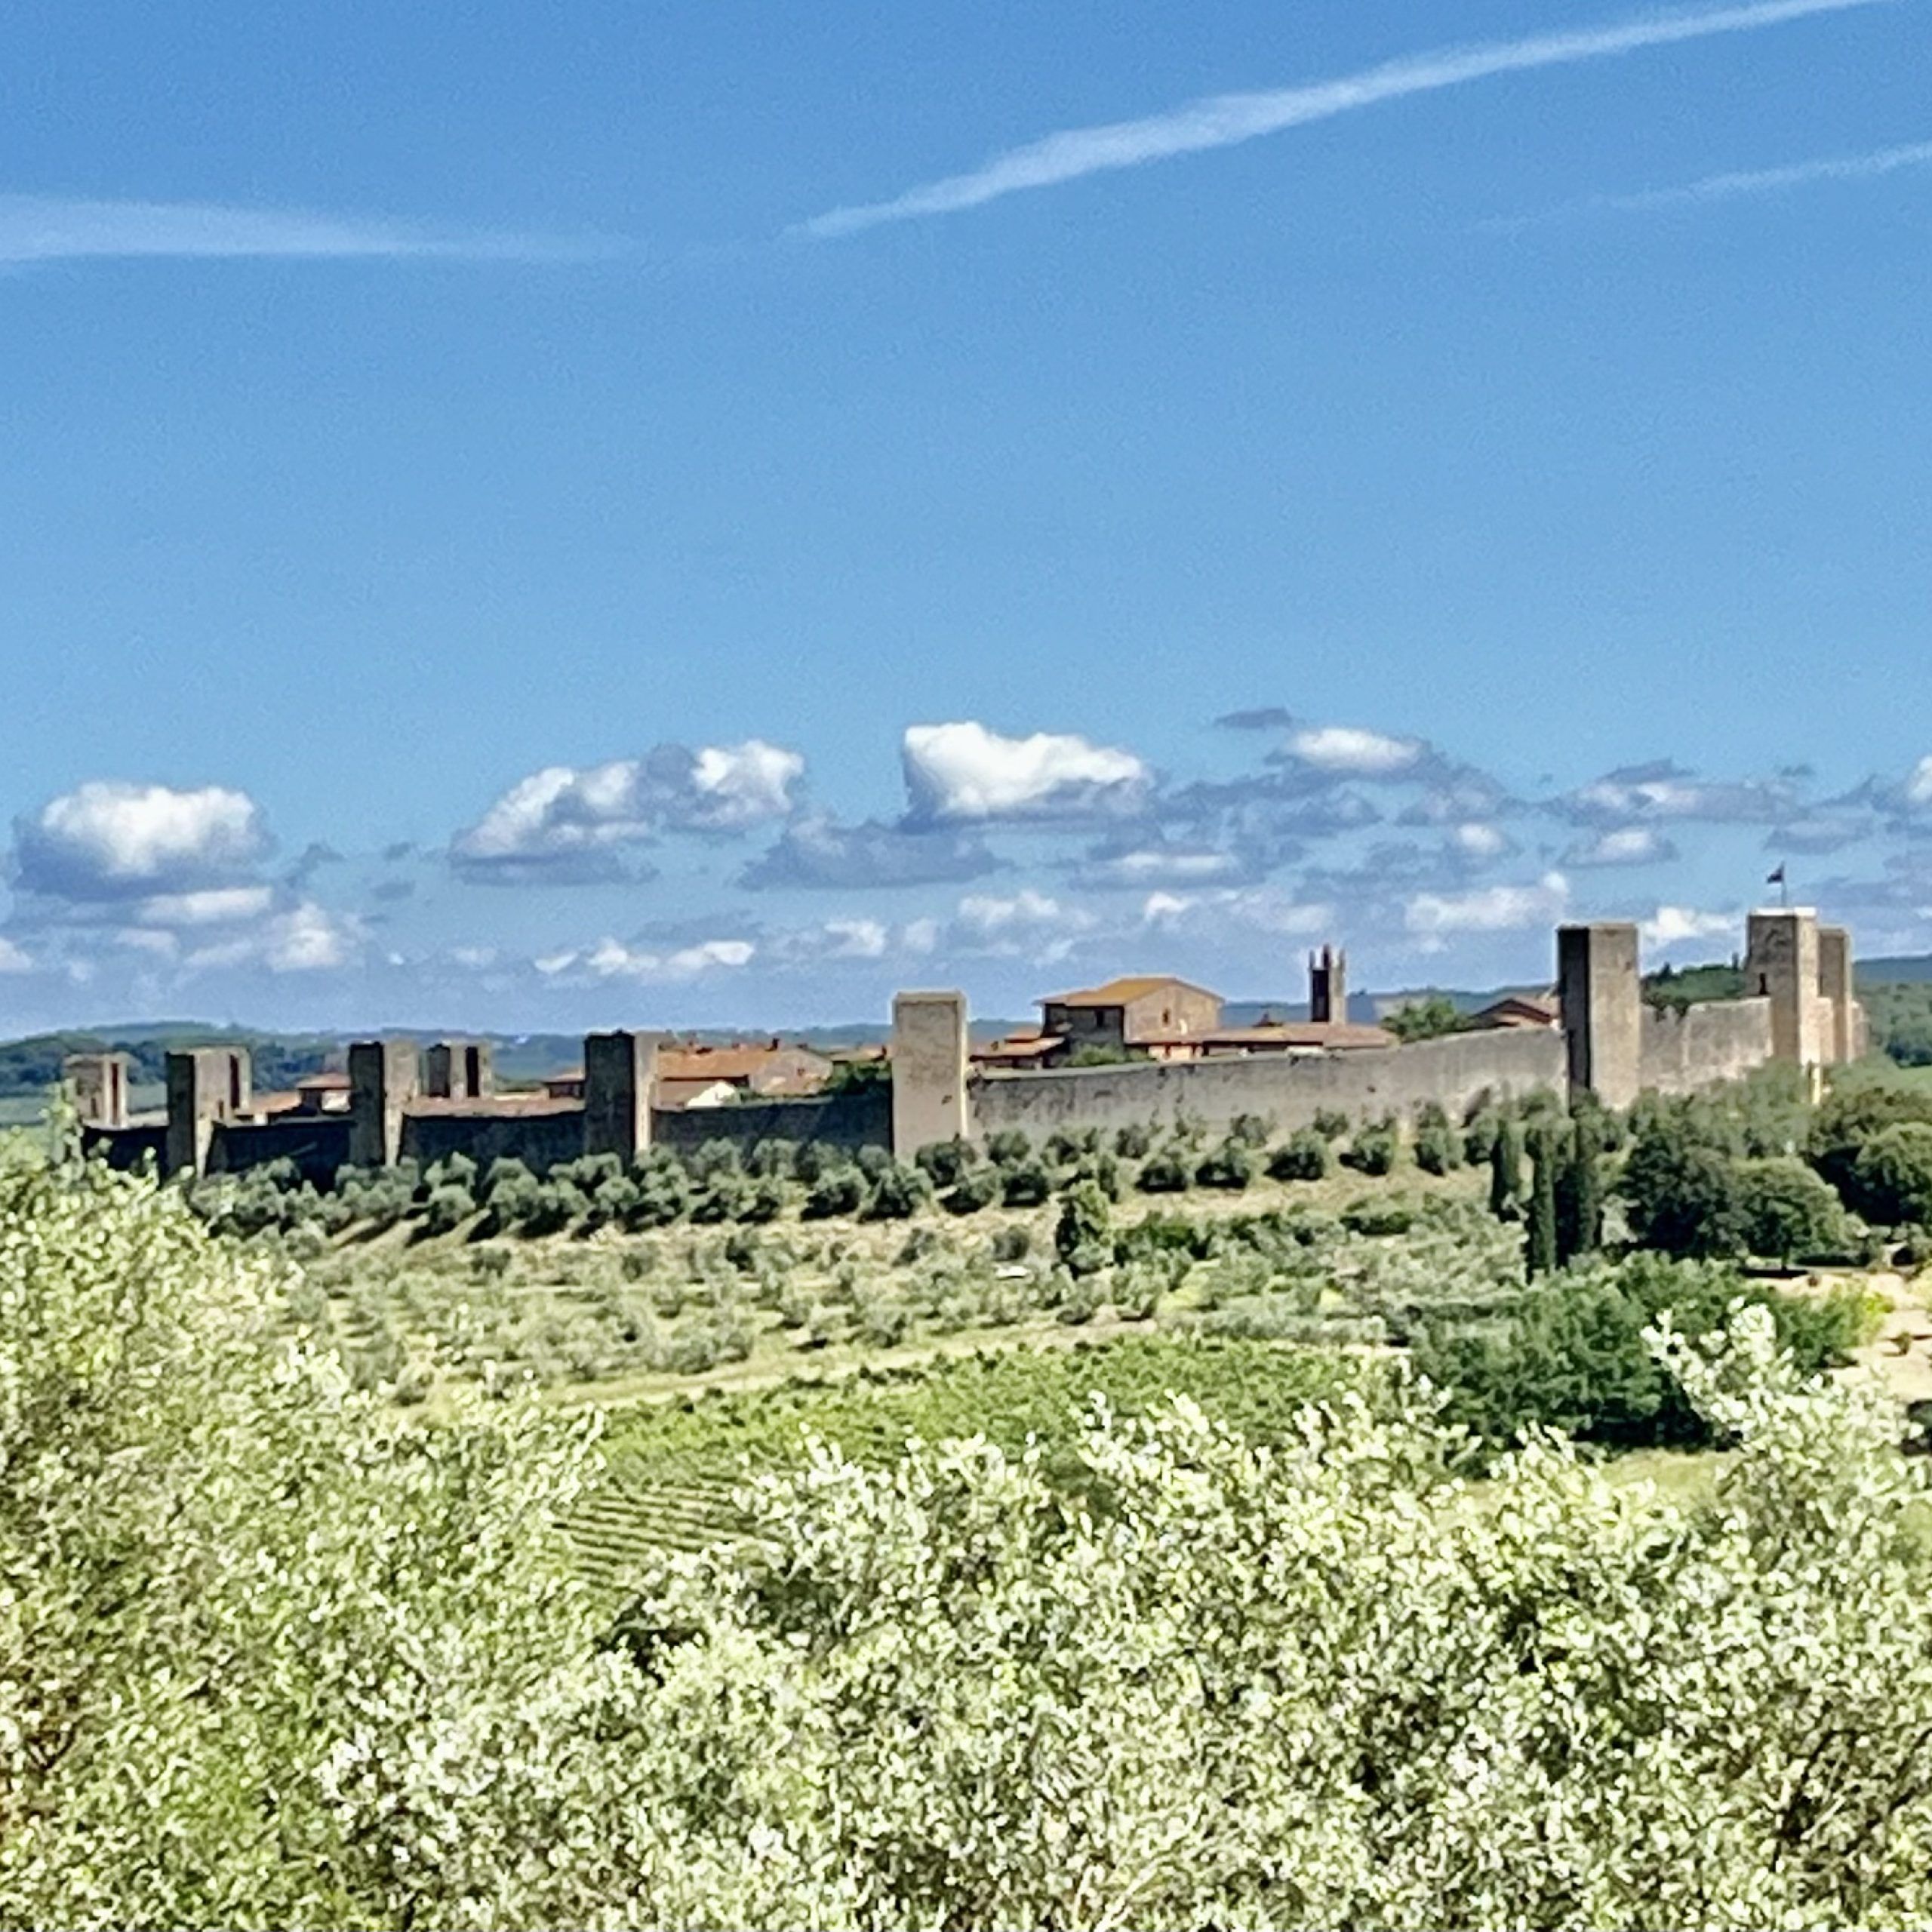 Where To Stay In Via Francigena - Waw.travel